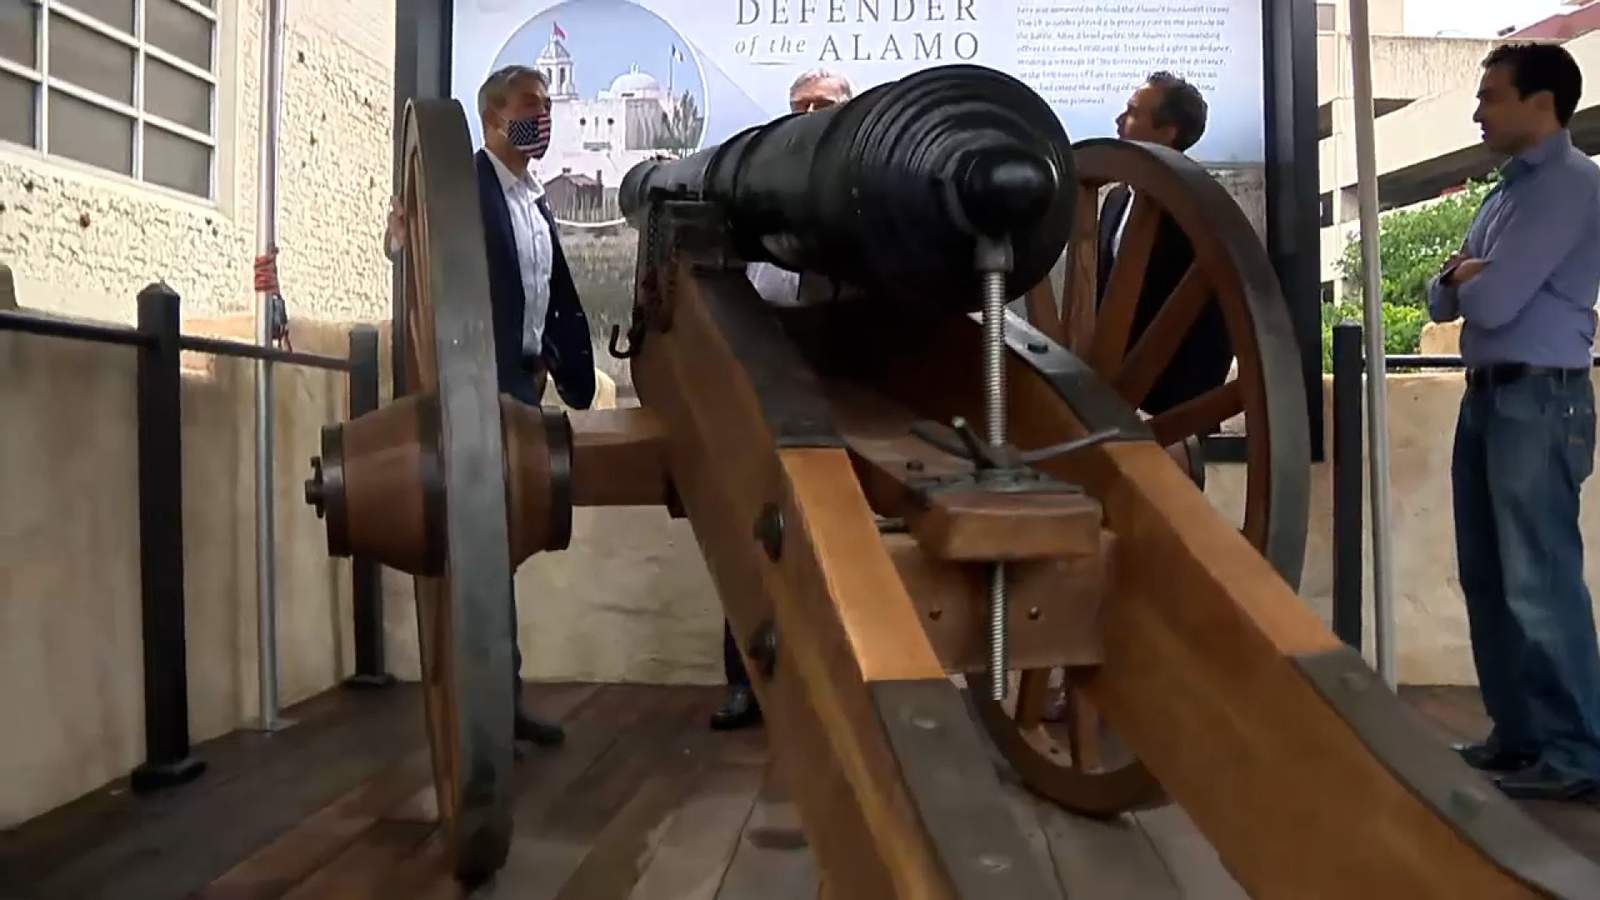 New Alamo exhibit offers replica of iconic cannon fired in 1836 battle